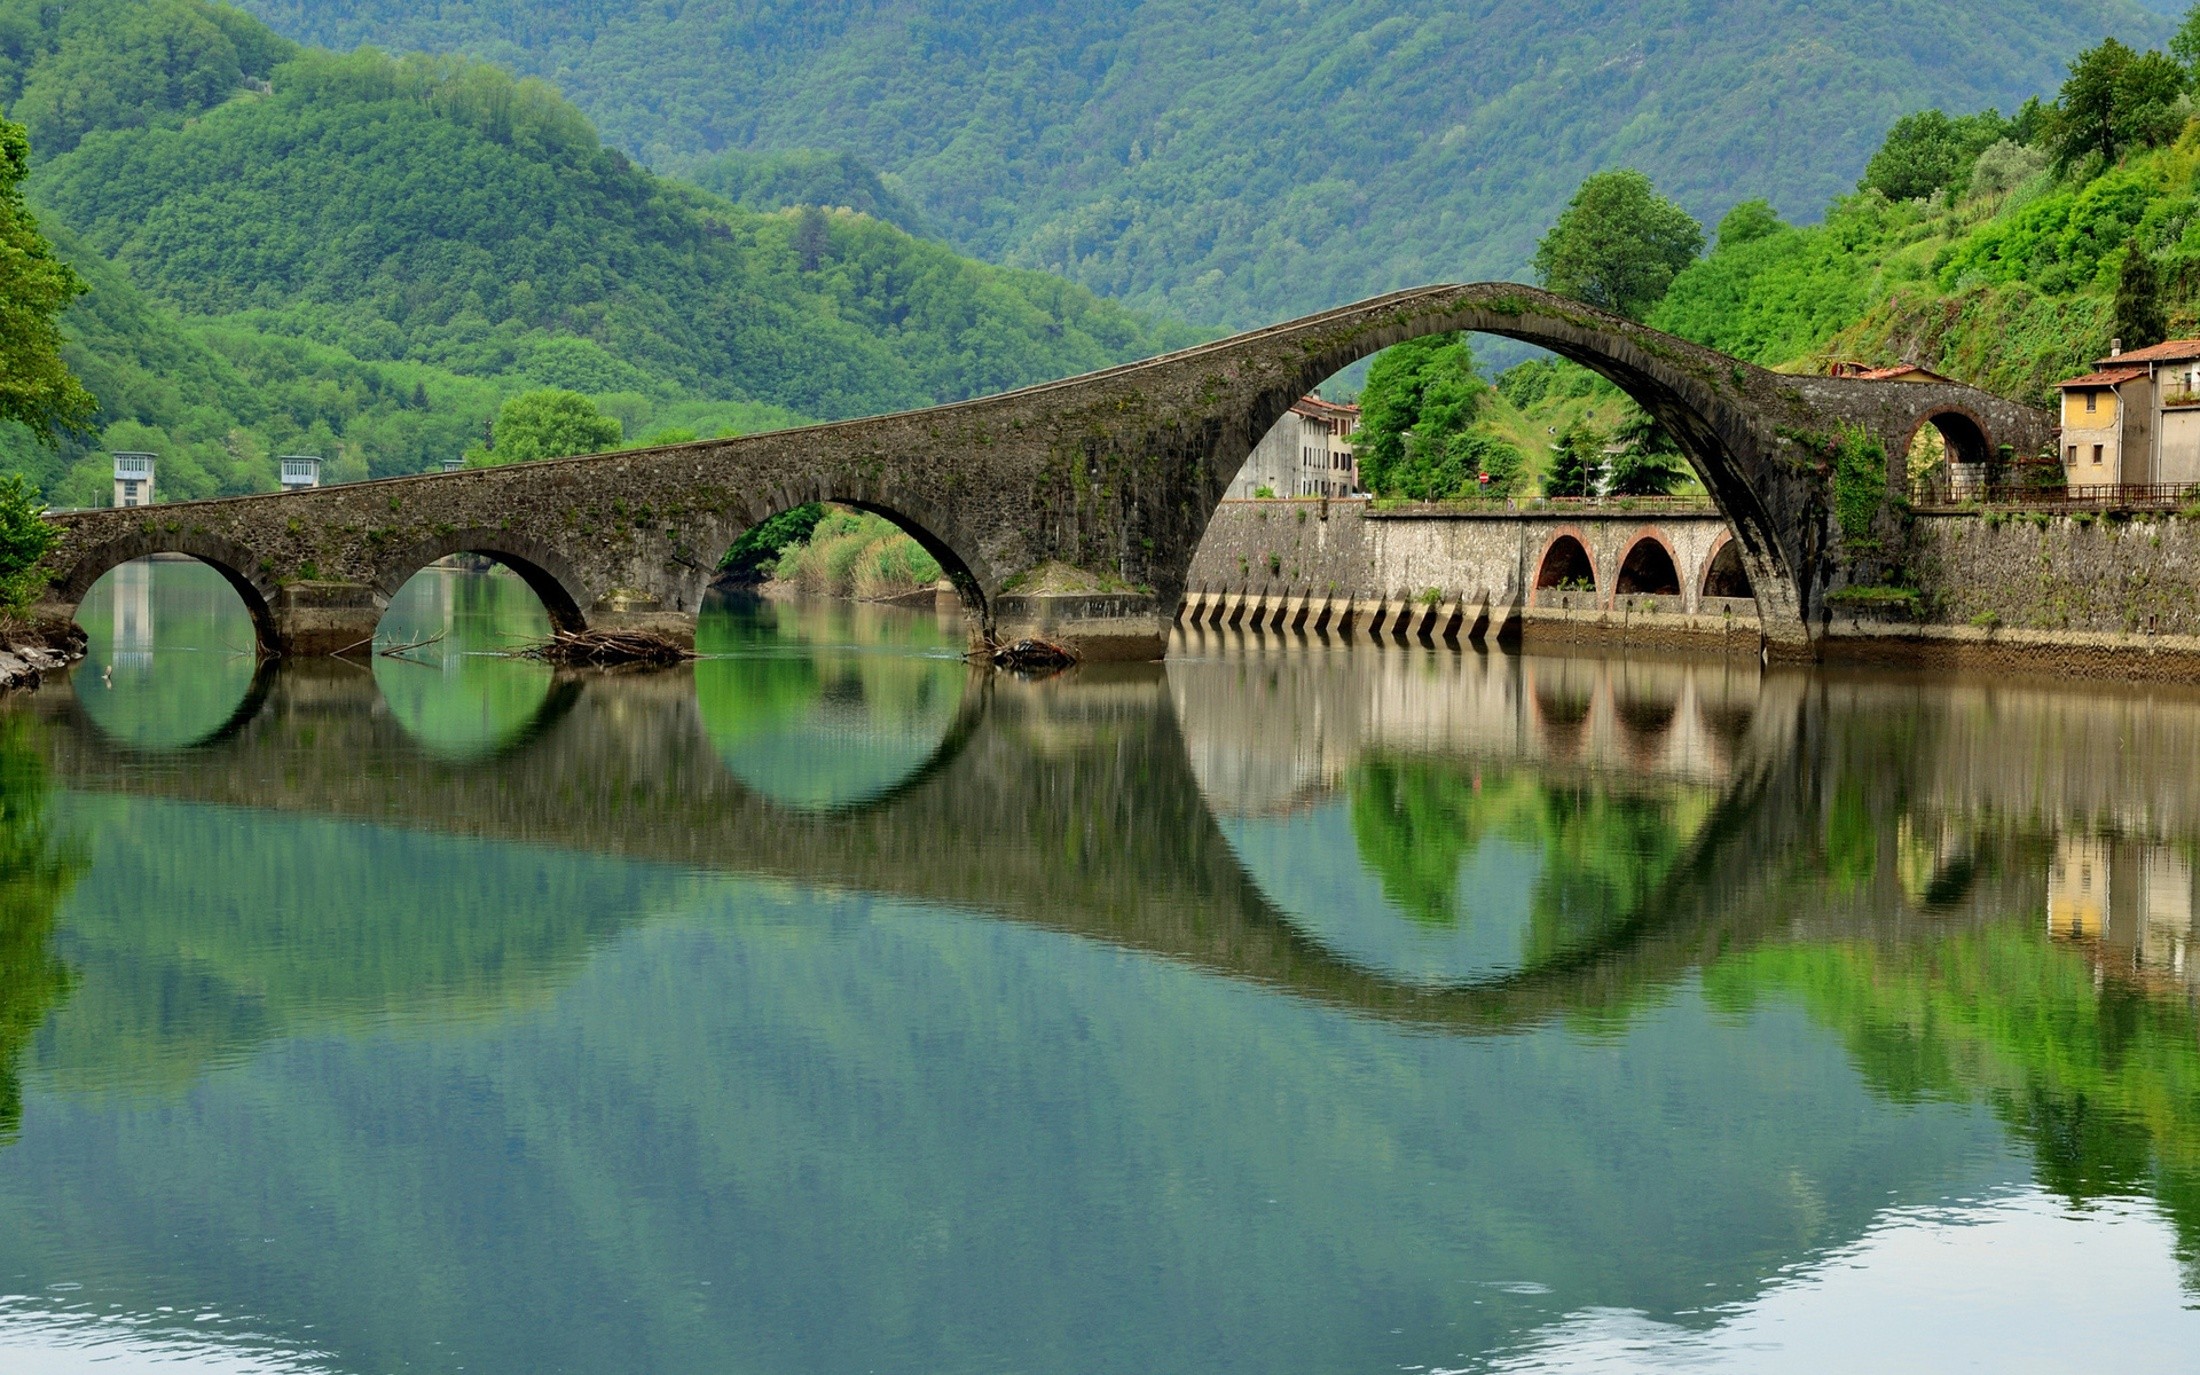 General 2200x1375 river arch bridge old bridge Italy outdoors reflection calm waters